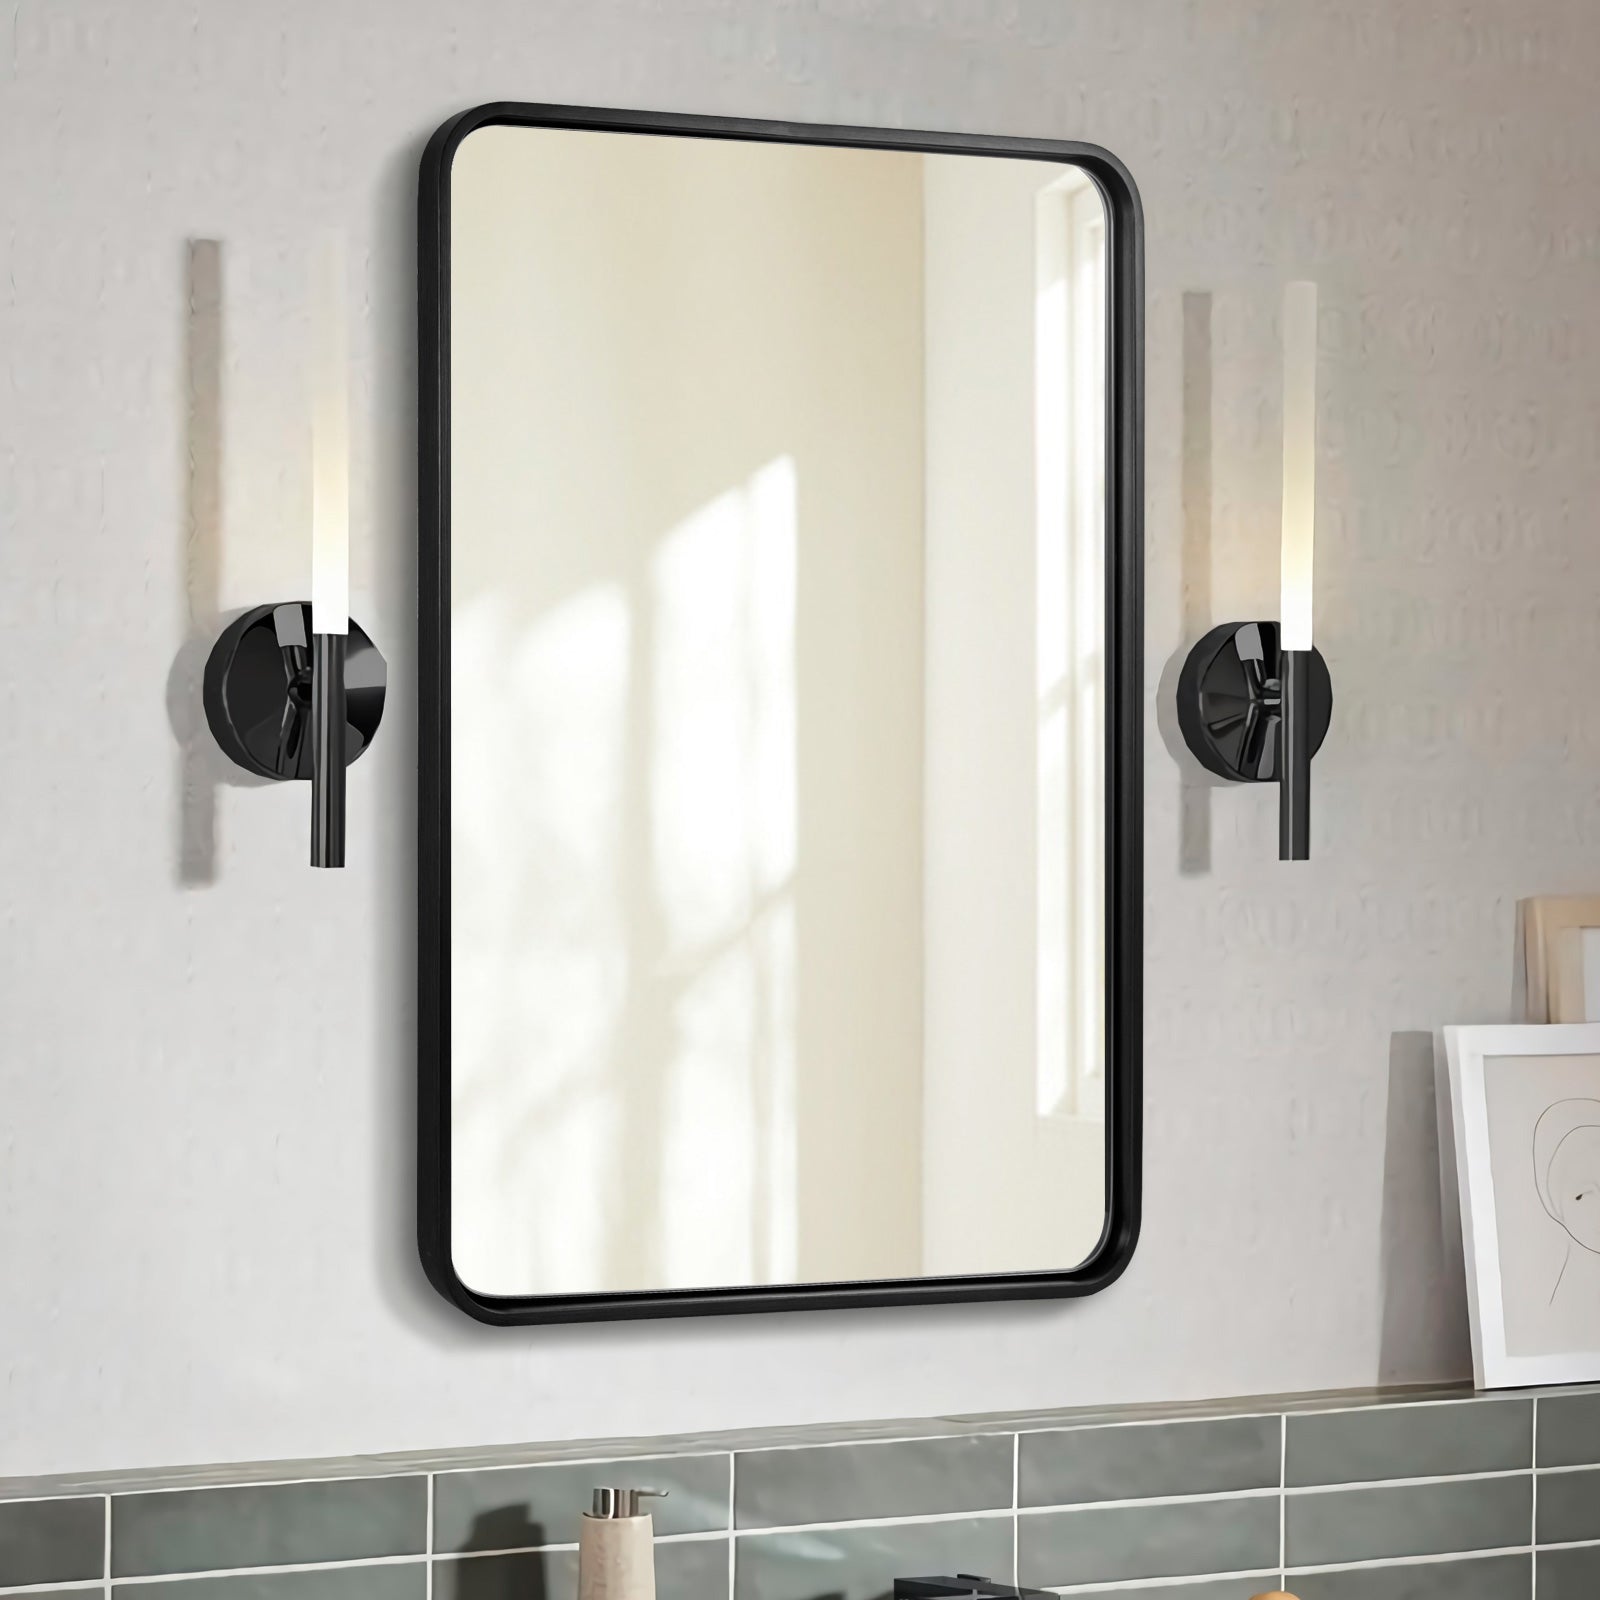 Antique Rounded Rectangle Mirror Metal Bathroom/Vanity Mirror Wall Mounted Vertically or Horizontally